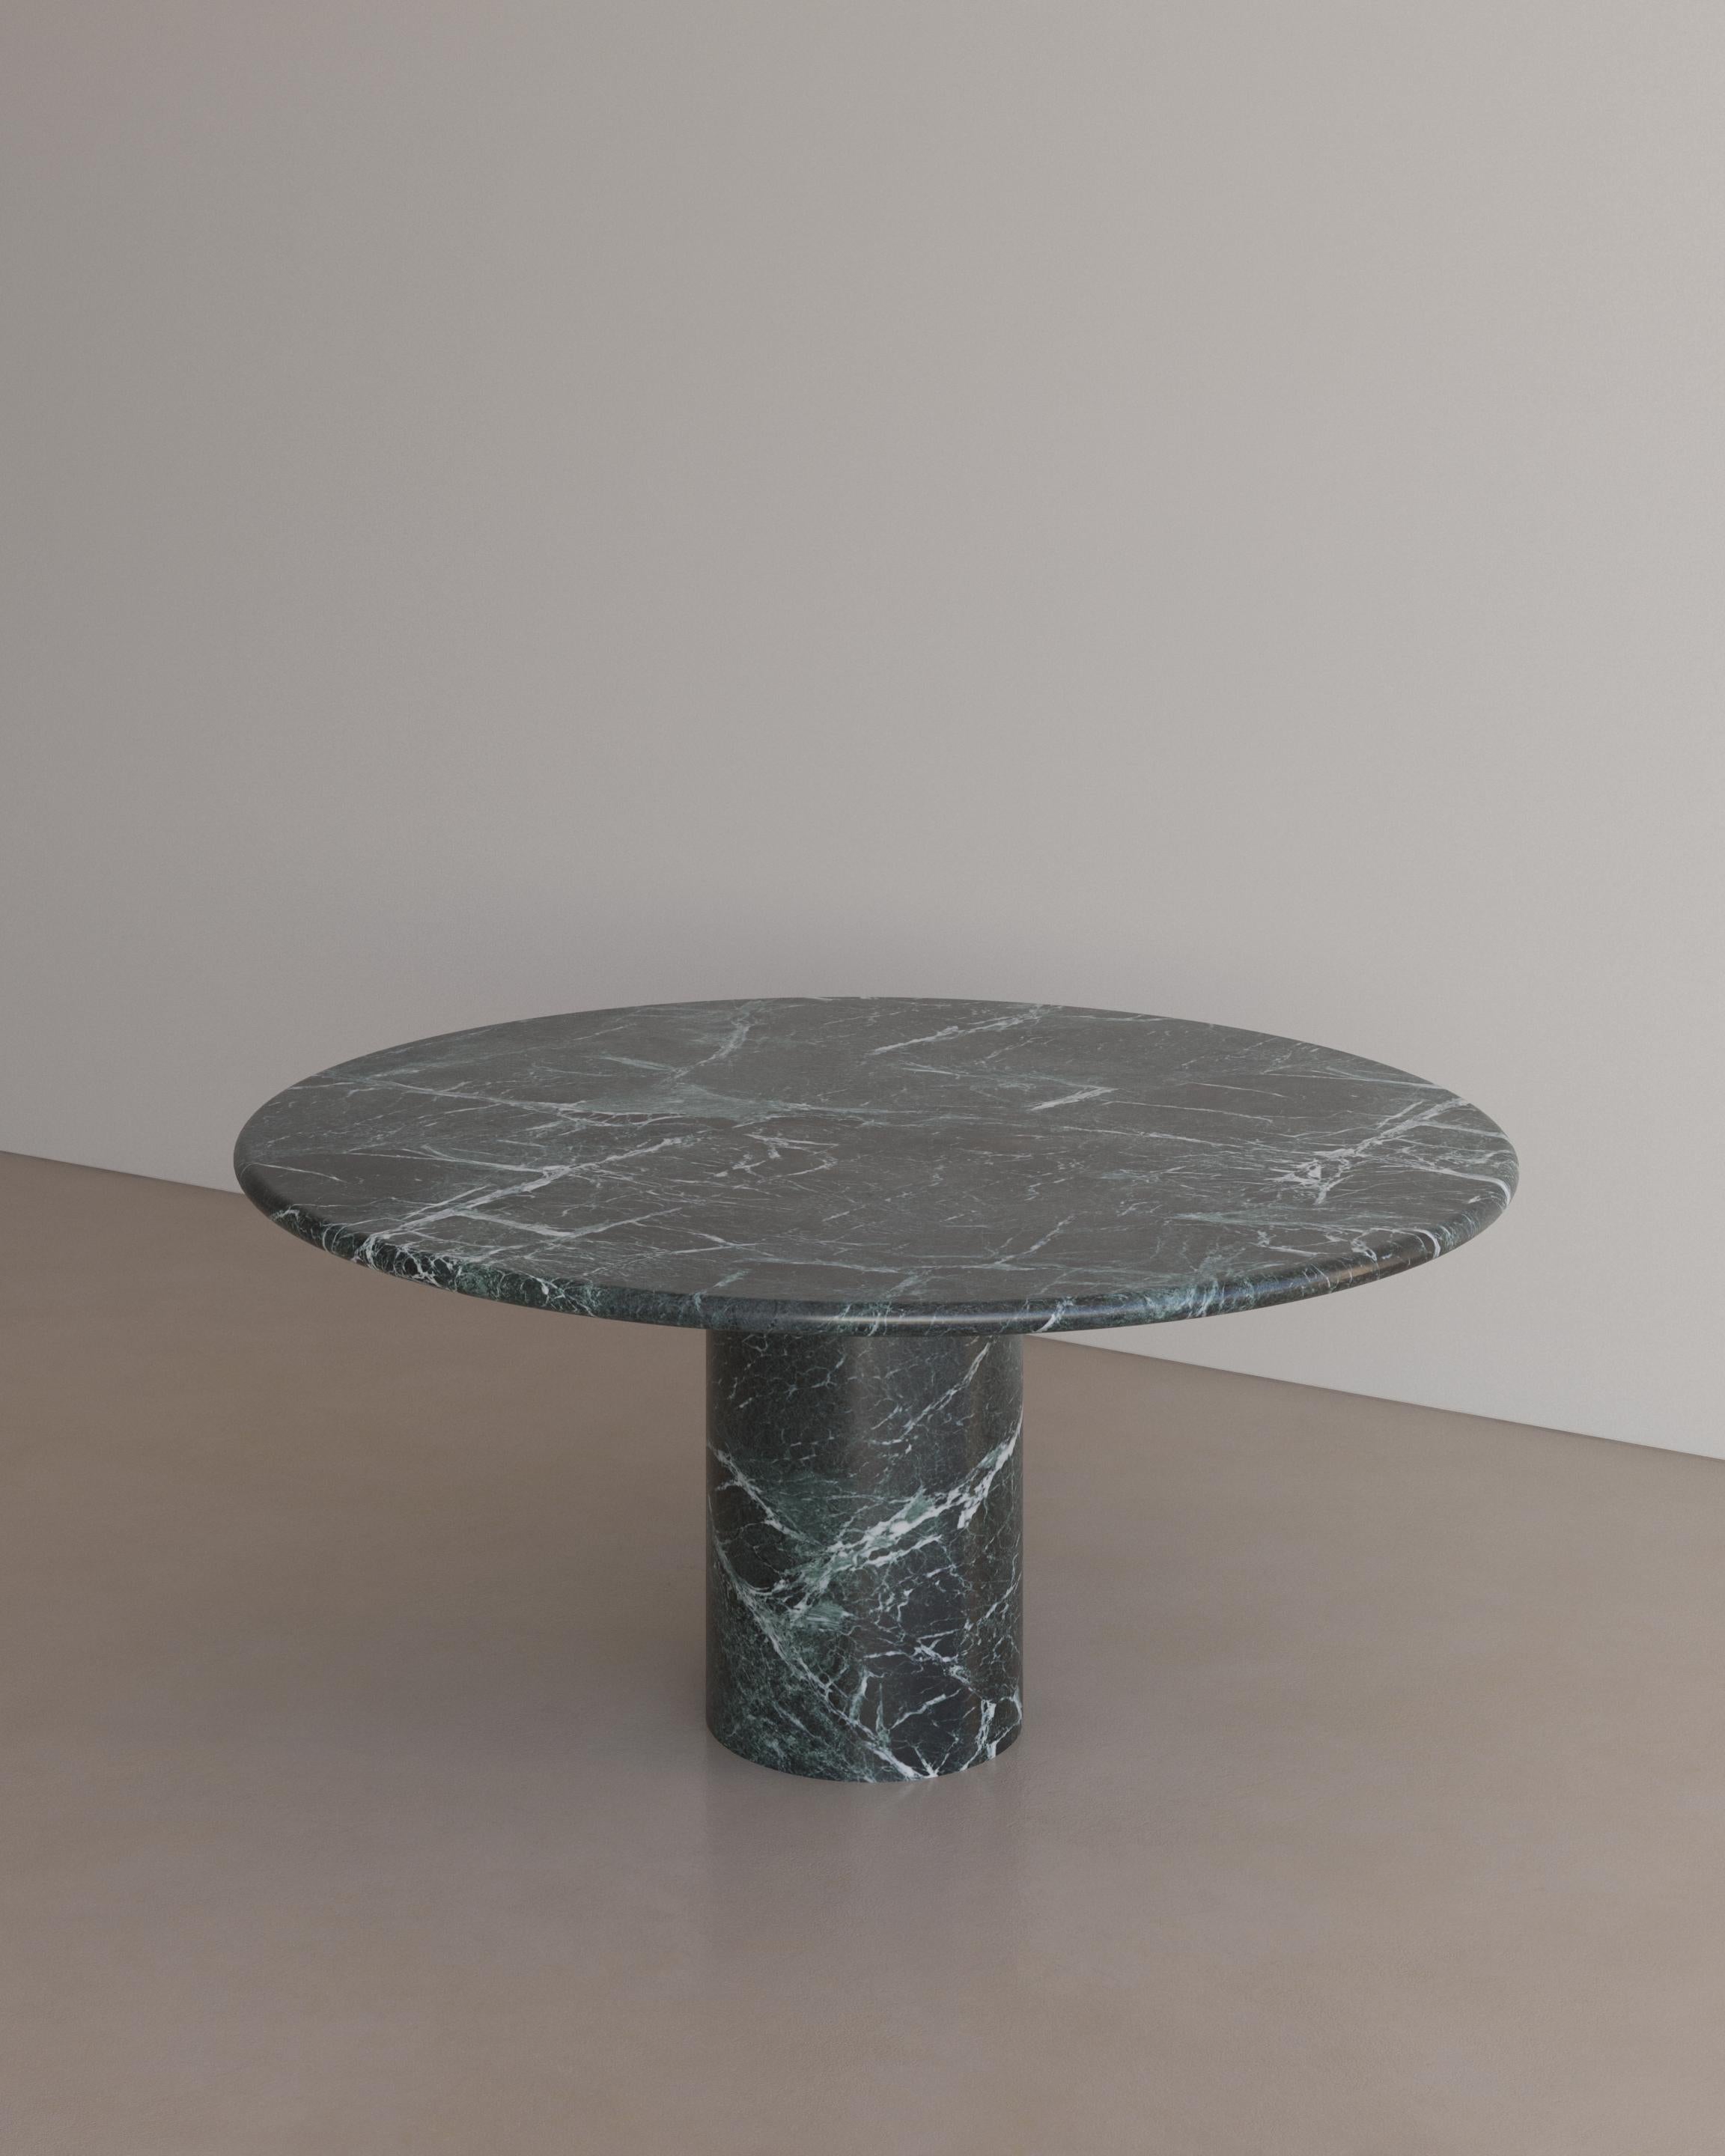 The Voyage Dining Table I in Verde Alpi Marble by The Essentialist celebrates the simple pleasures that define life and replenish the soul through harnessing essential form. Envisioned as an ode to historical elegance, captured through a modern lens